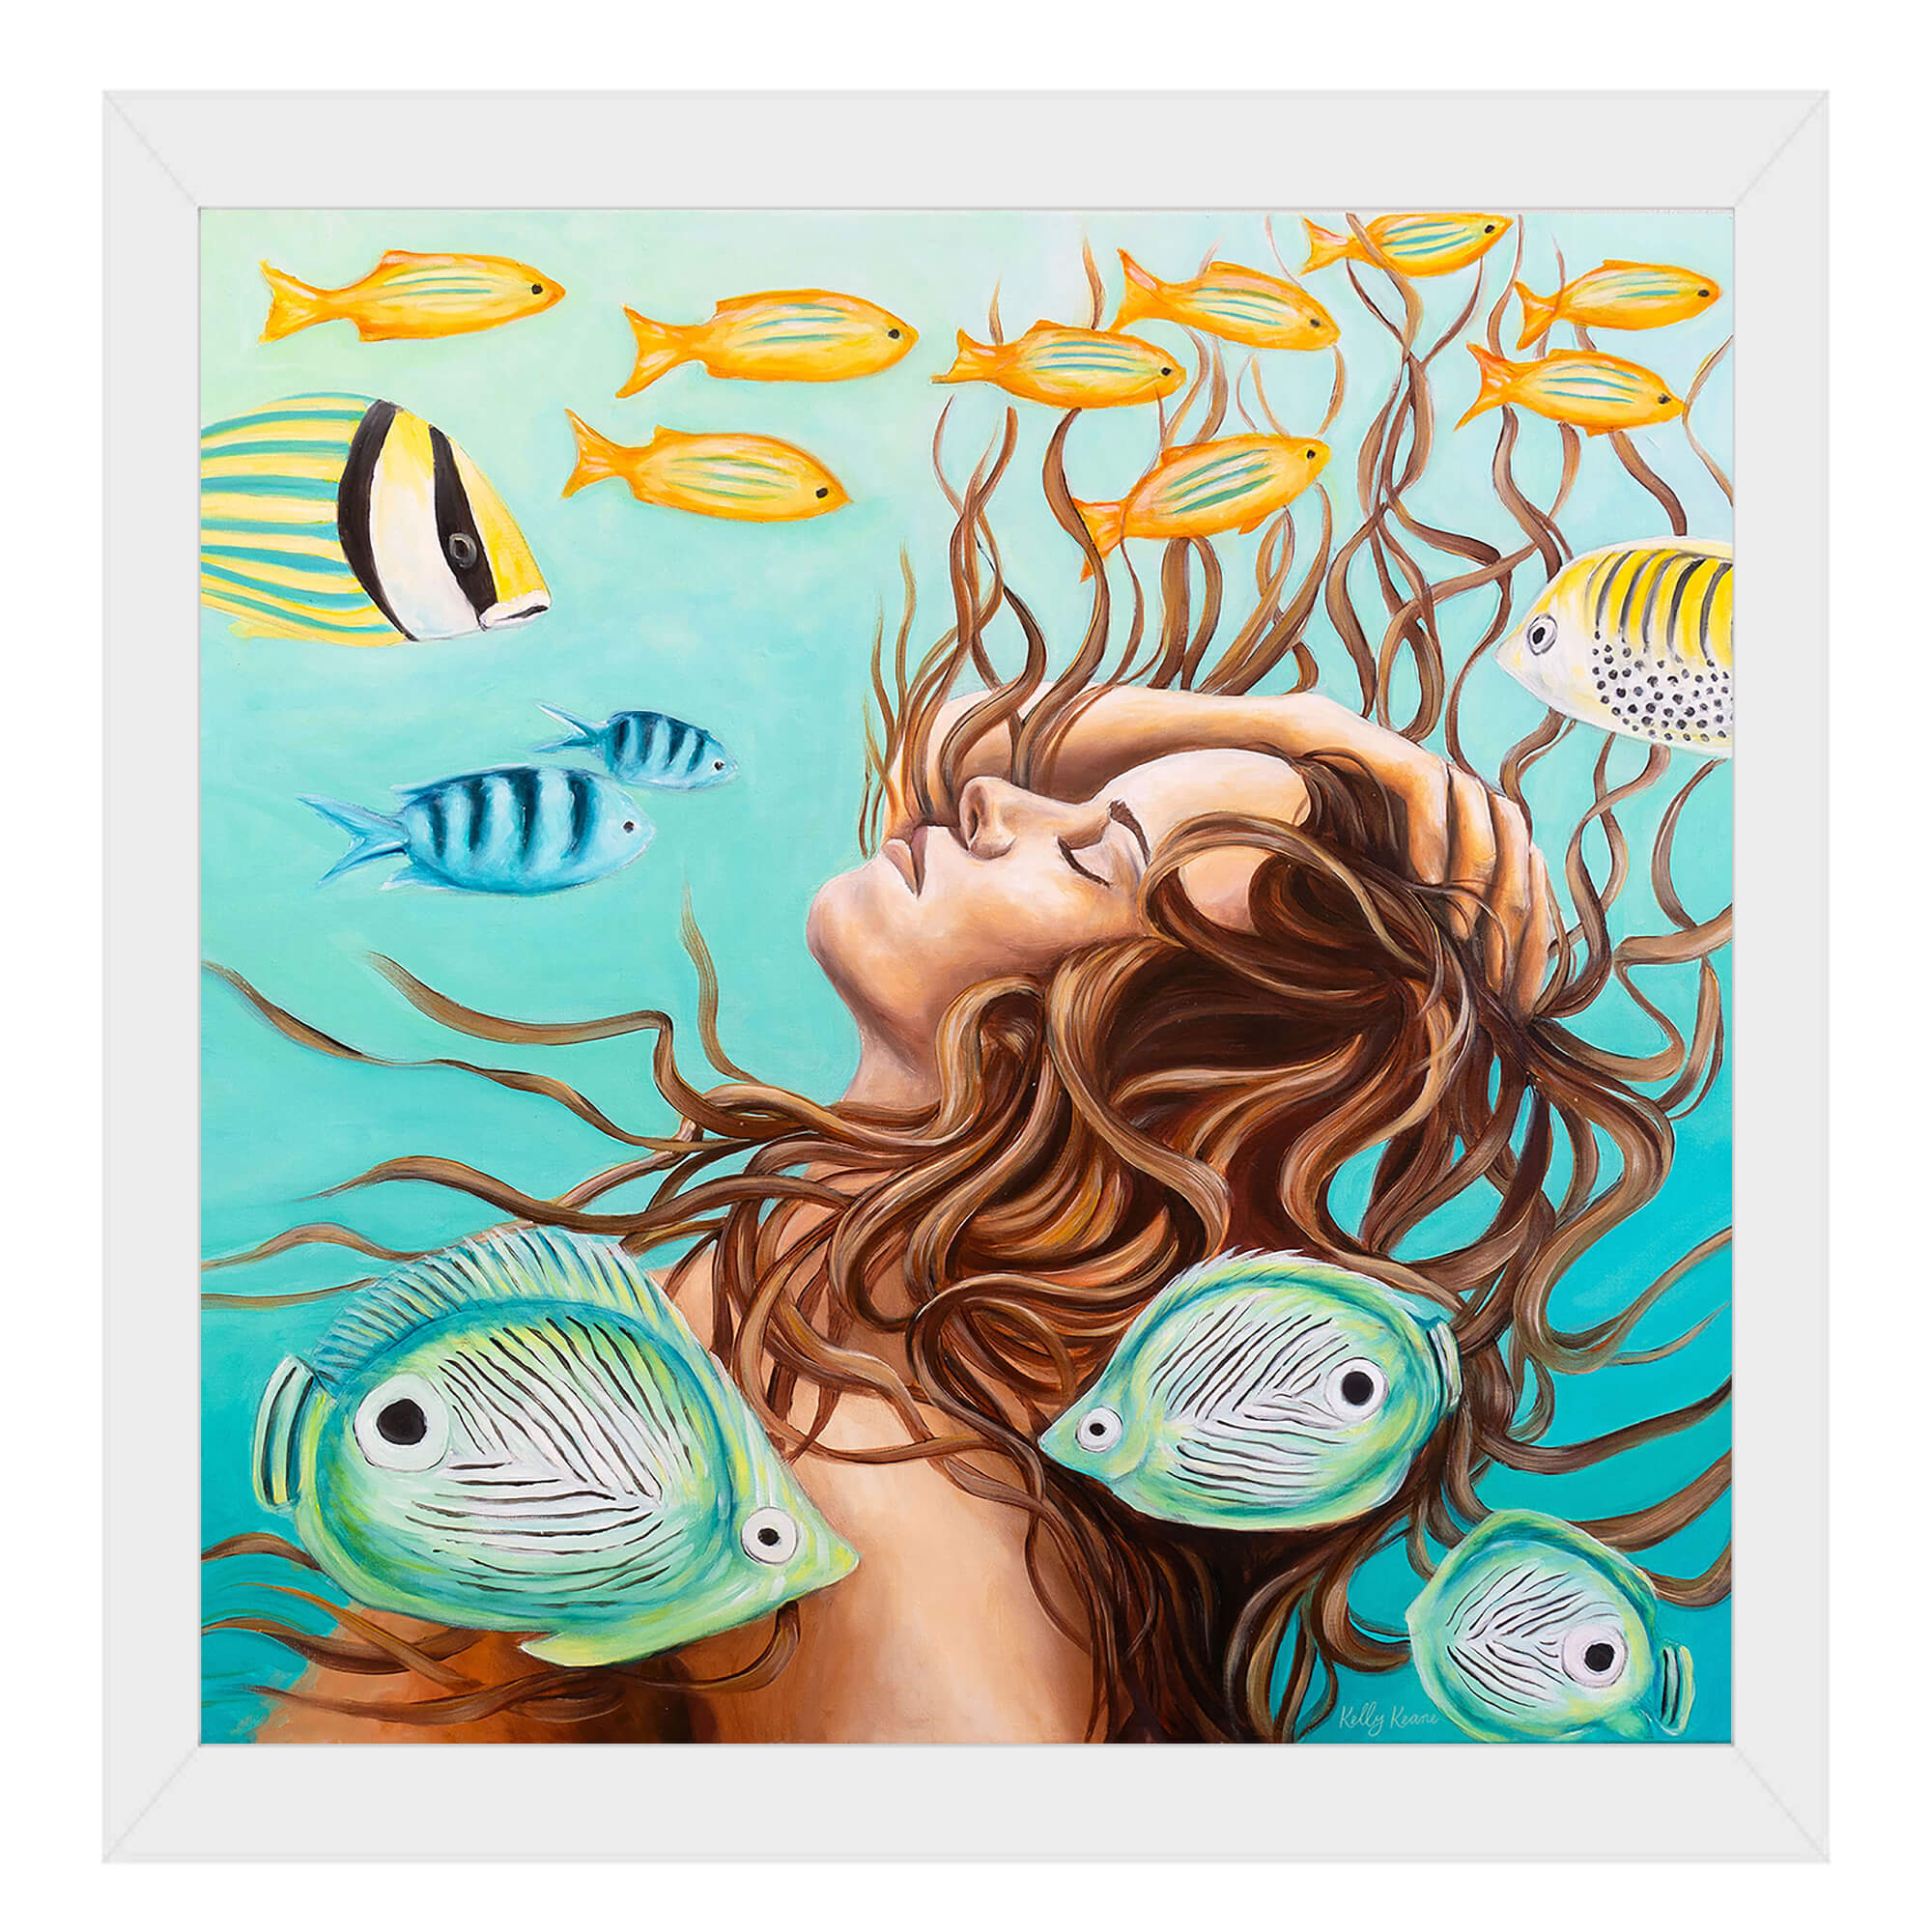 Paper art print of a woman under clear teal colored water by Hawaii artist Kelly Keane